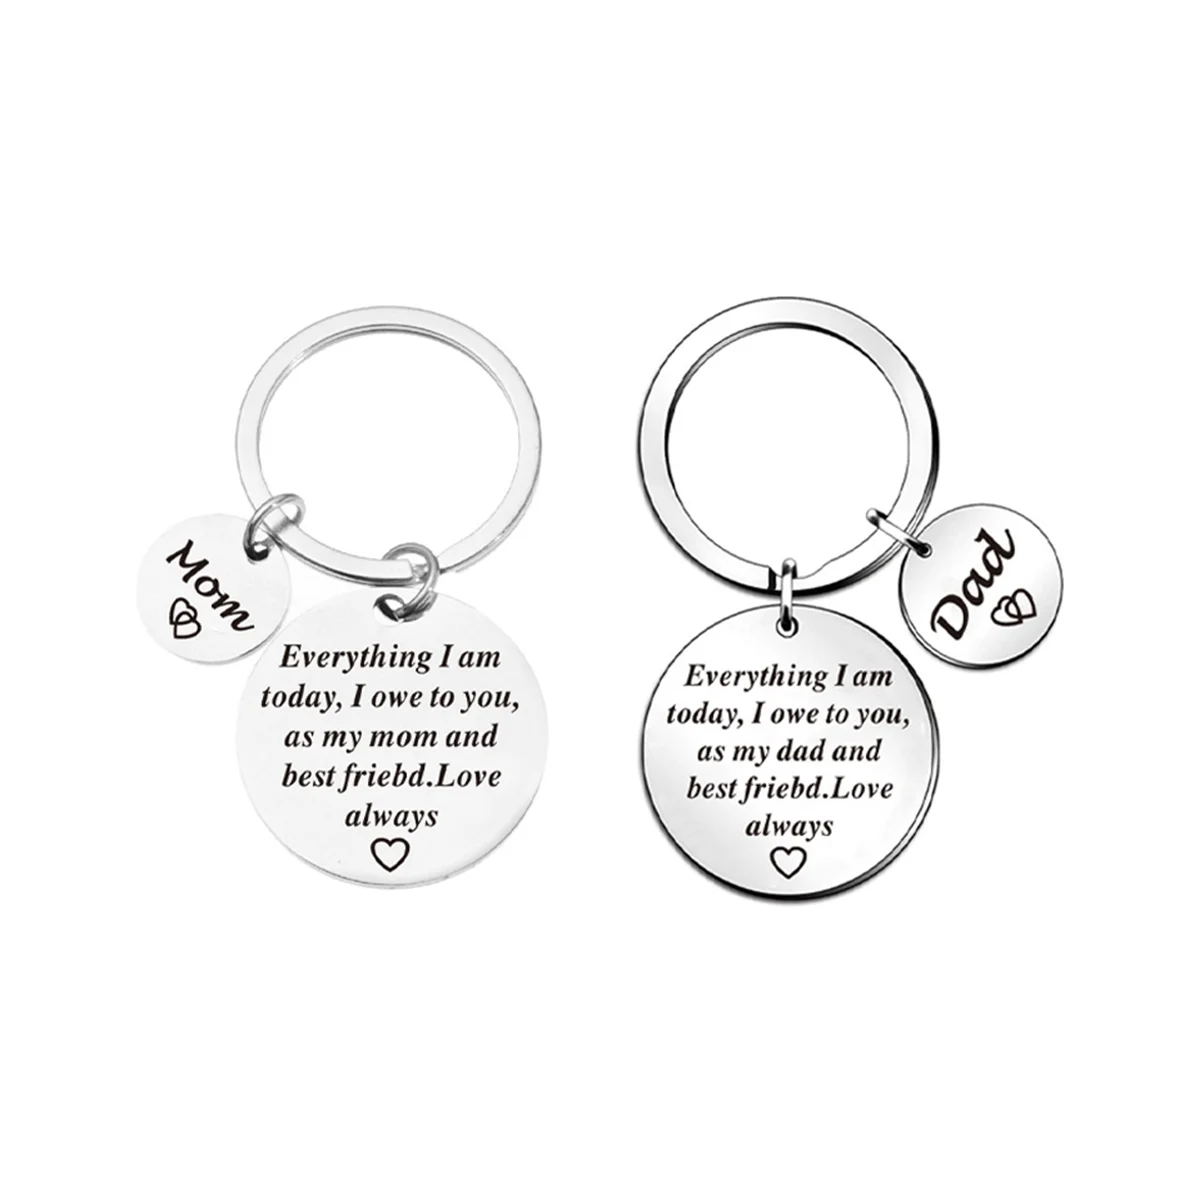 

2Pcs Mother Day Keychain,Fathers Day Gifts From Daughter Keychain-As My Mom and ,Love Always